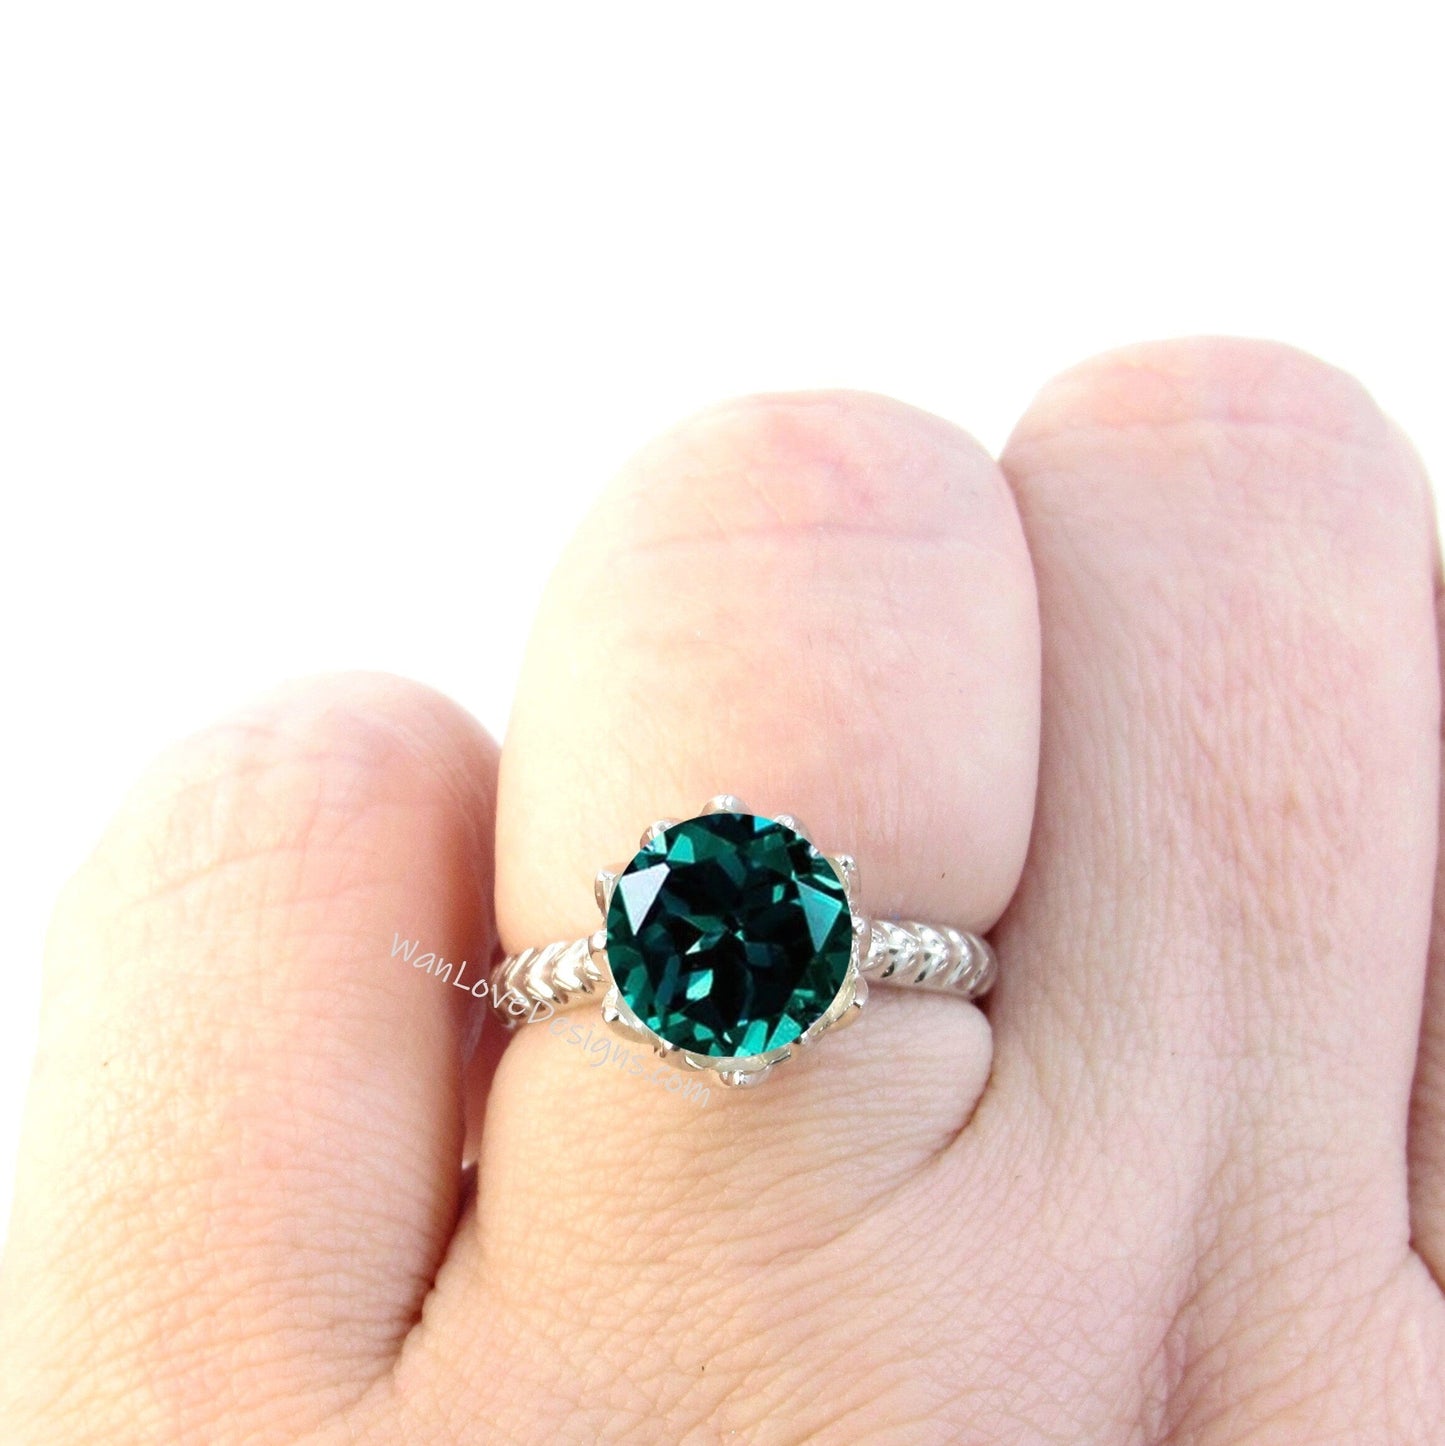 Round cut Emerald engagement ring vintage Lotus Flower engagement ring woman nature leaf ring Unique Bridal ring Anniversary gift Wan Love Designs